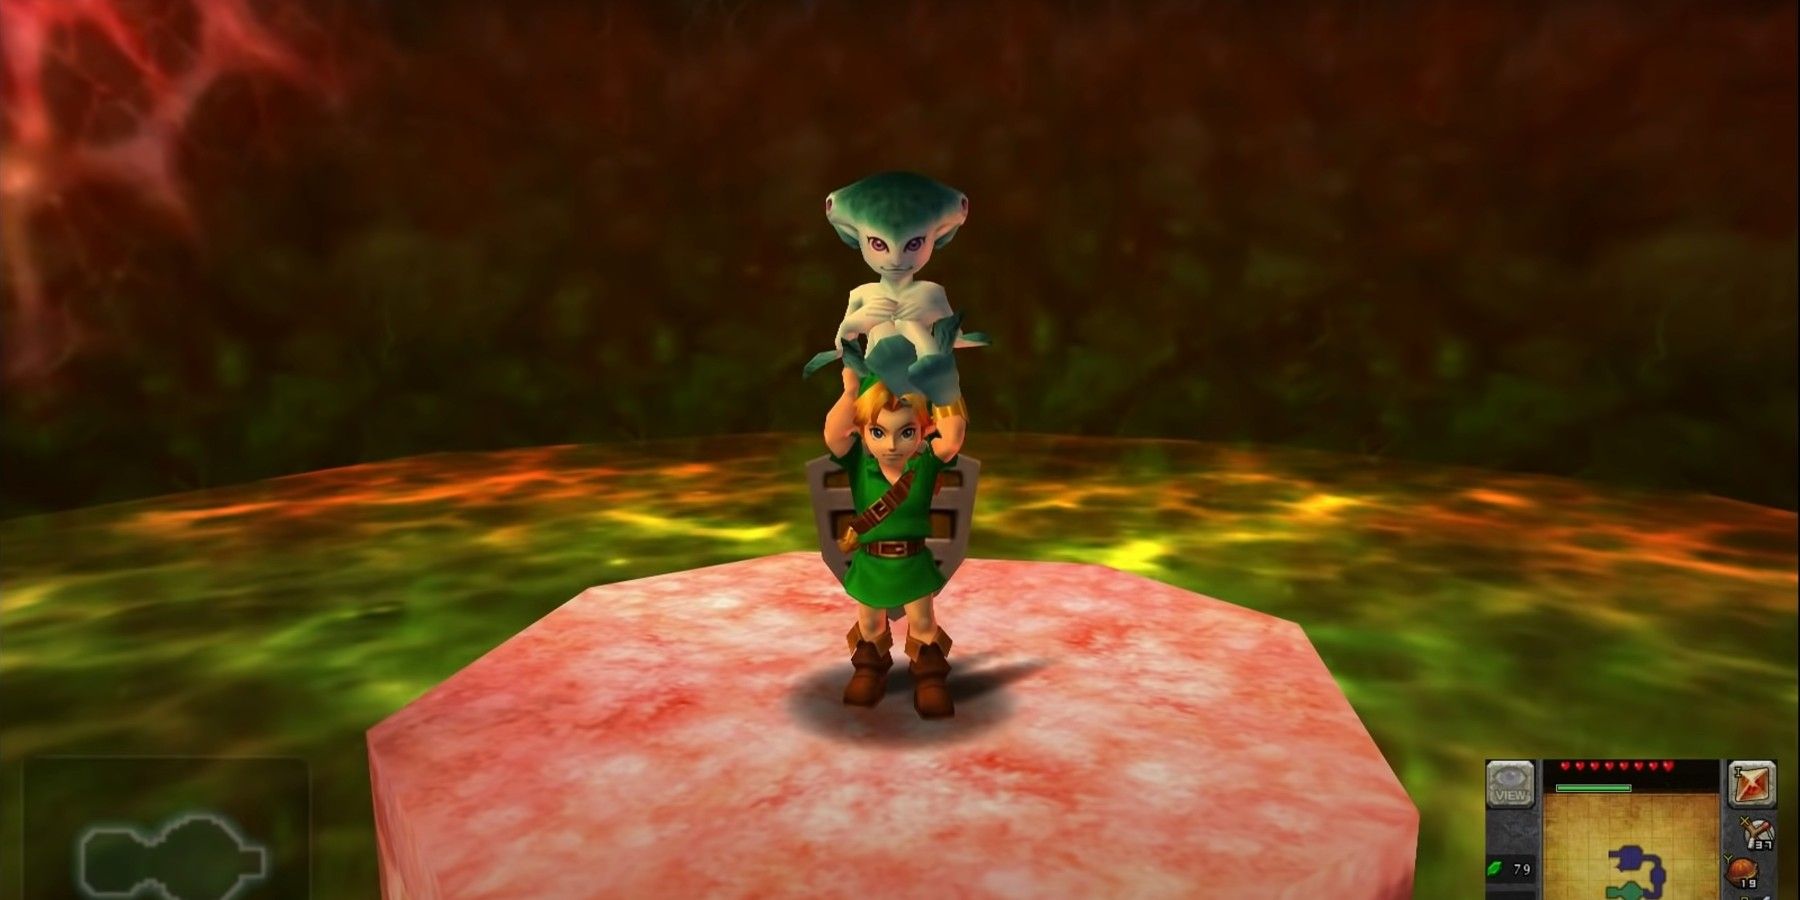 Link using Ruto as a weapon in Ocarina of Time